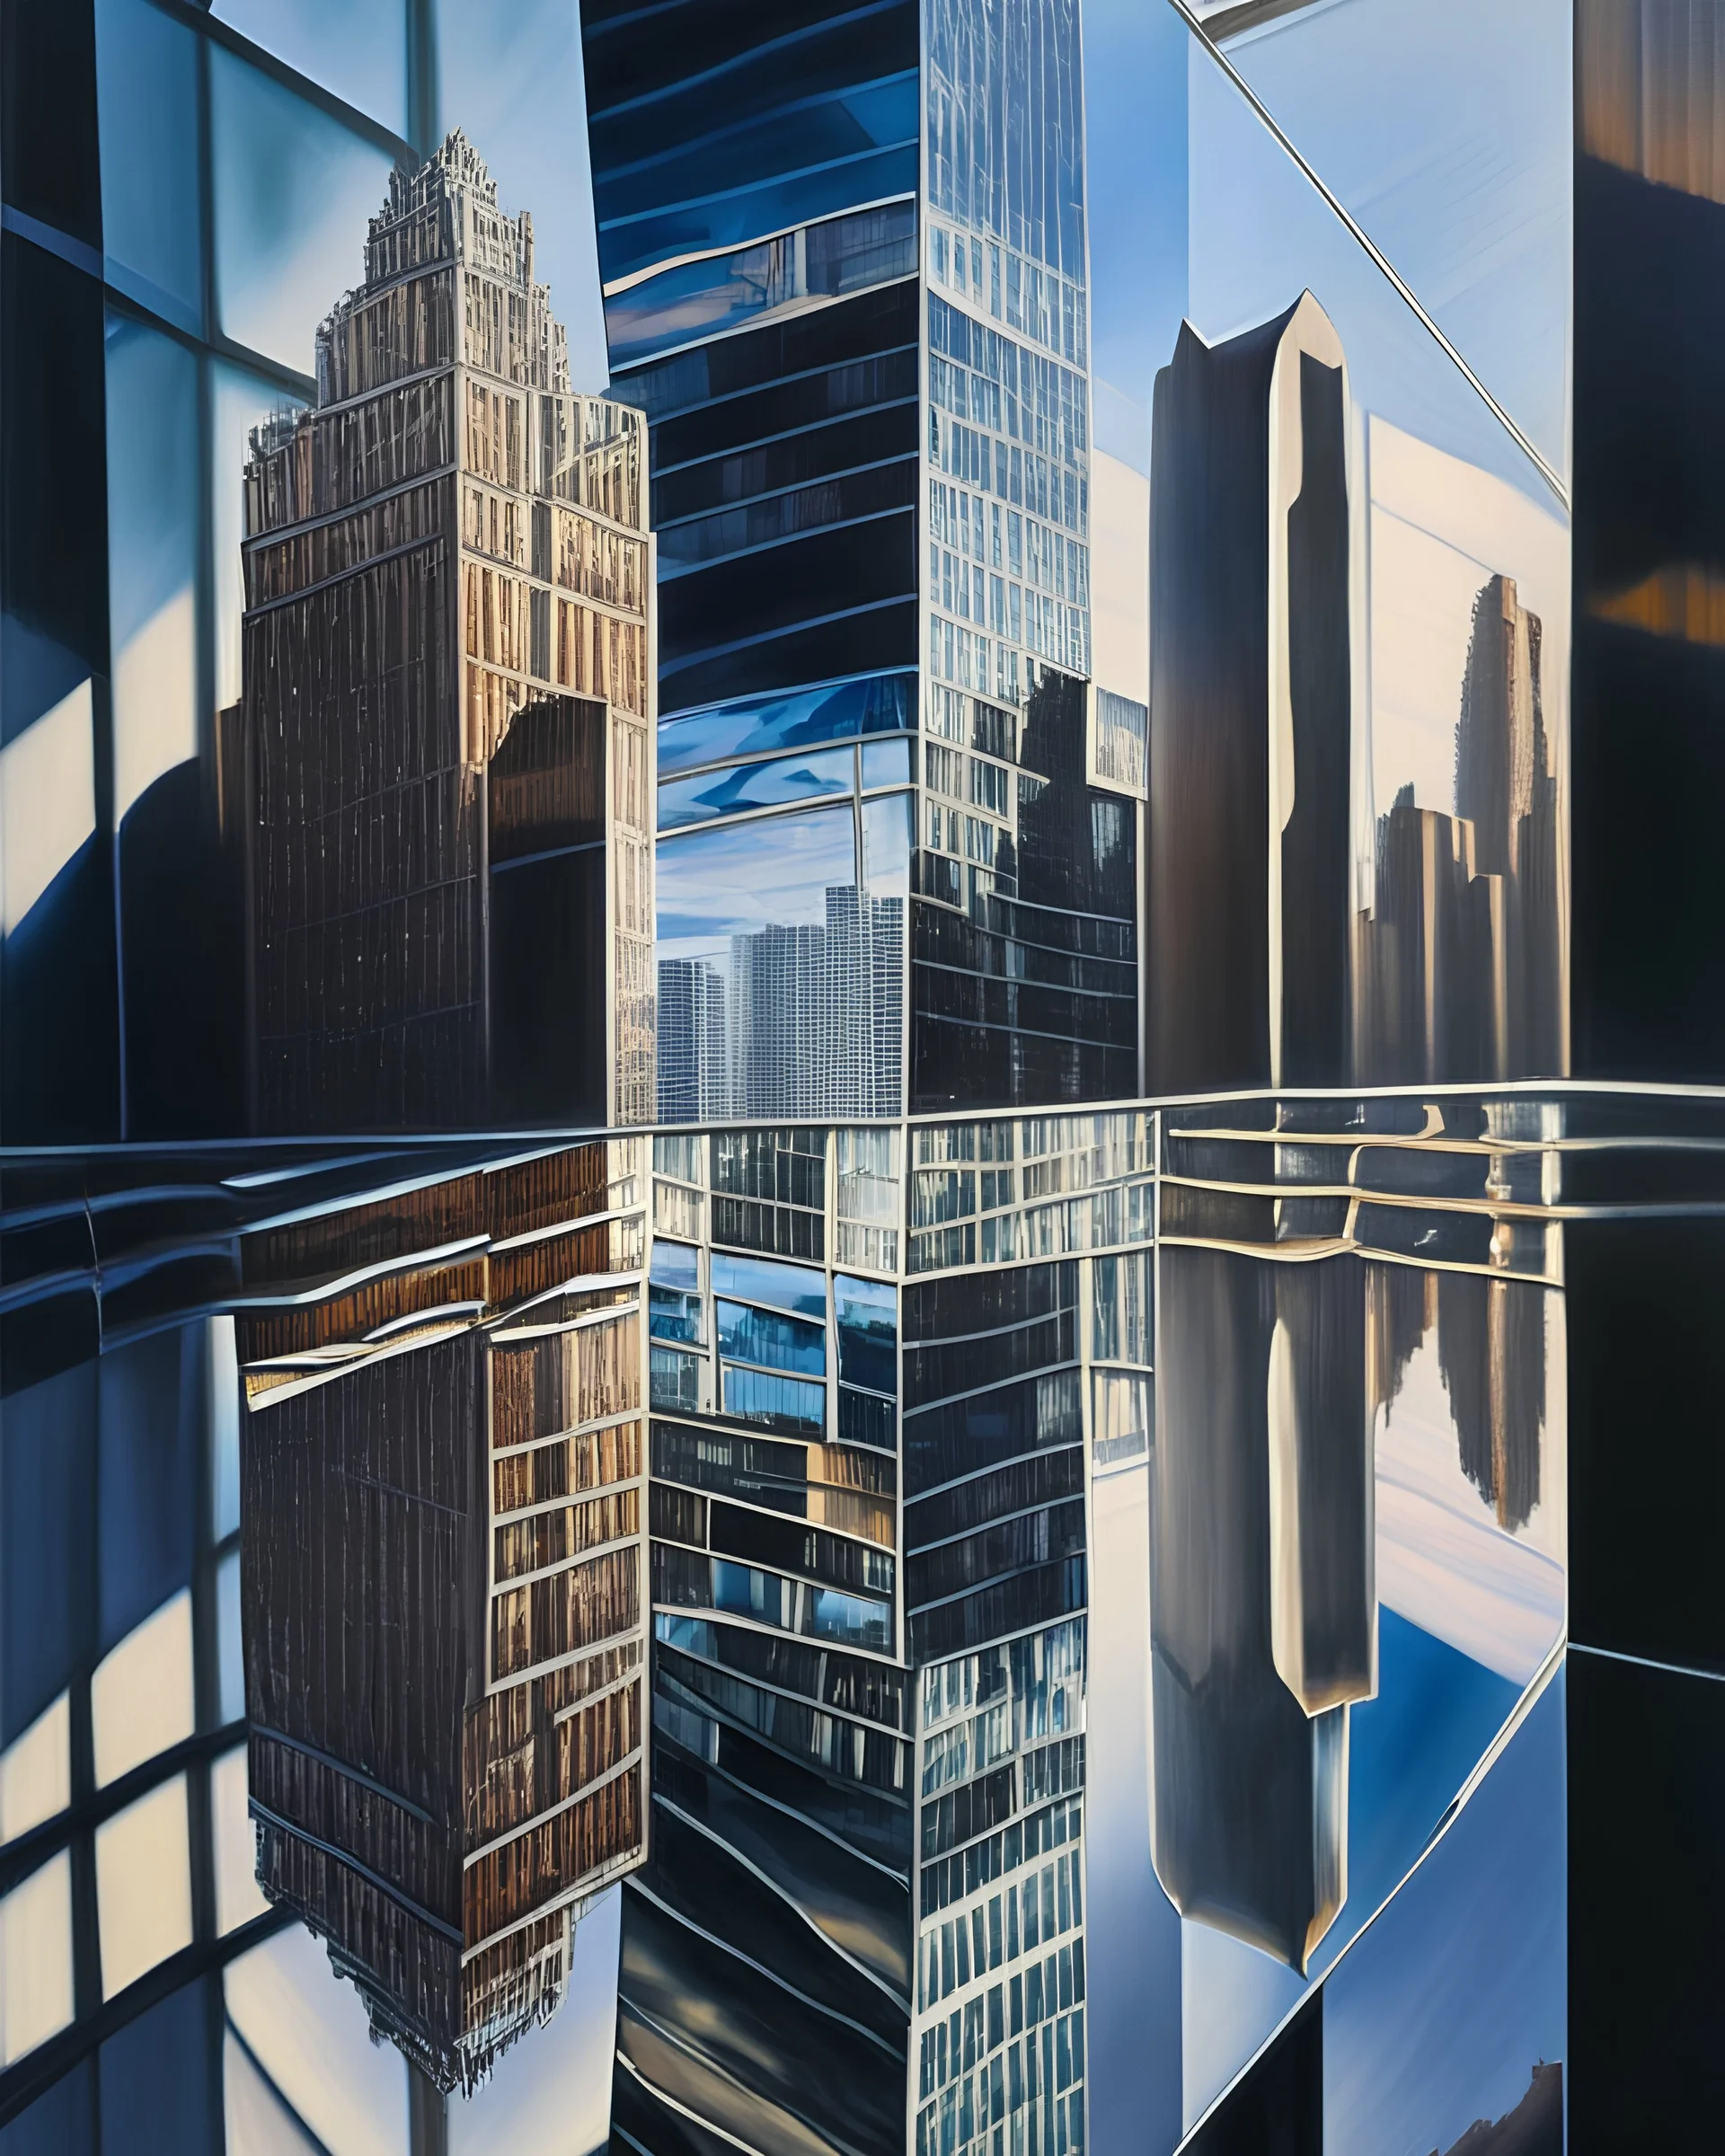 A hyper-realistic painting of a city skyline, as seen through the distorted, reflective surface of a glass building, in the style of trompe l'oeil, exceptional detail, atmospheric perspective, and skillful manipulation of light and shadow, inspired by the works of Richard Estes and Chuck Close, challenging the viewer's perception of reality.